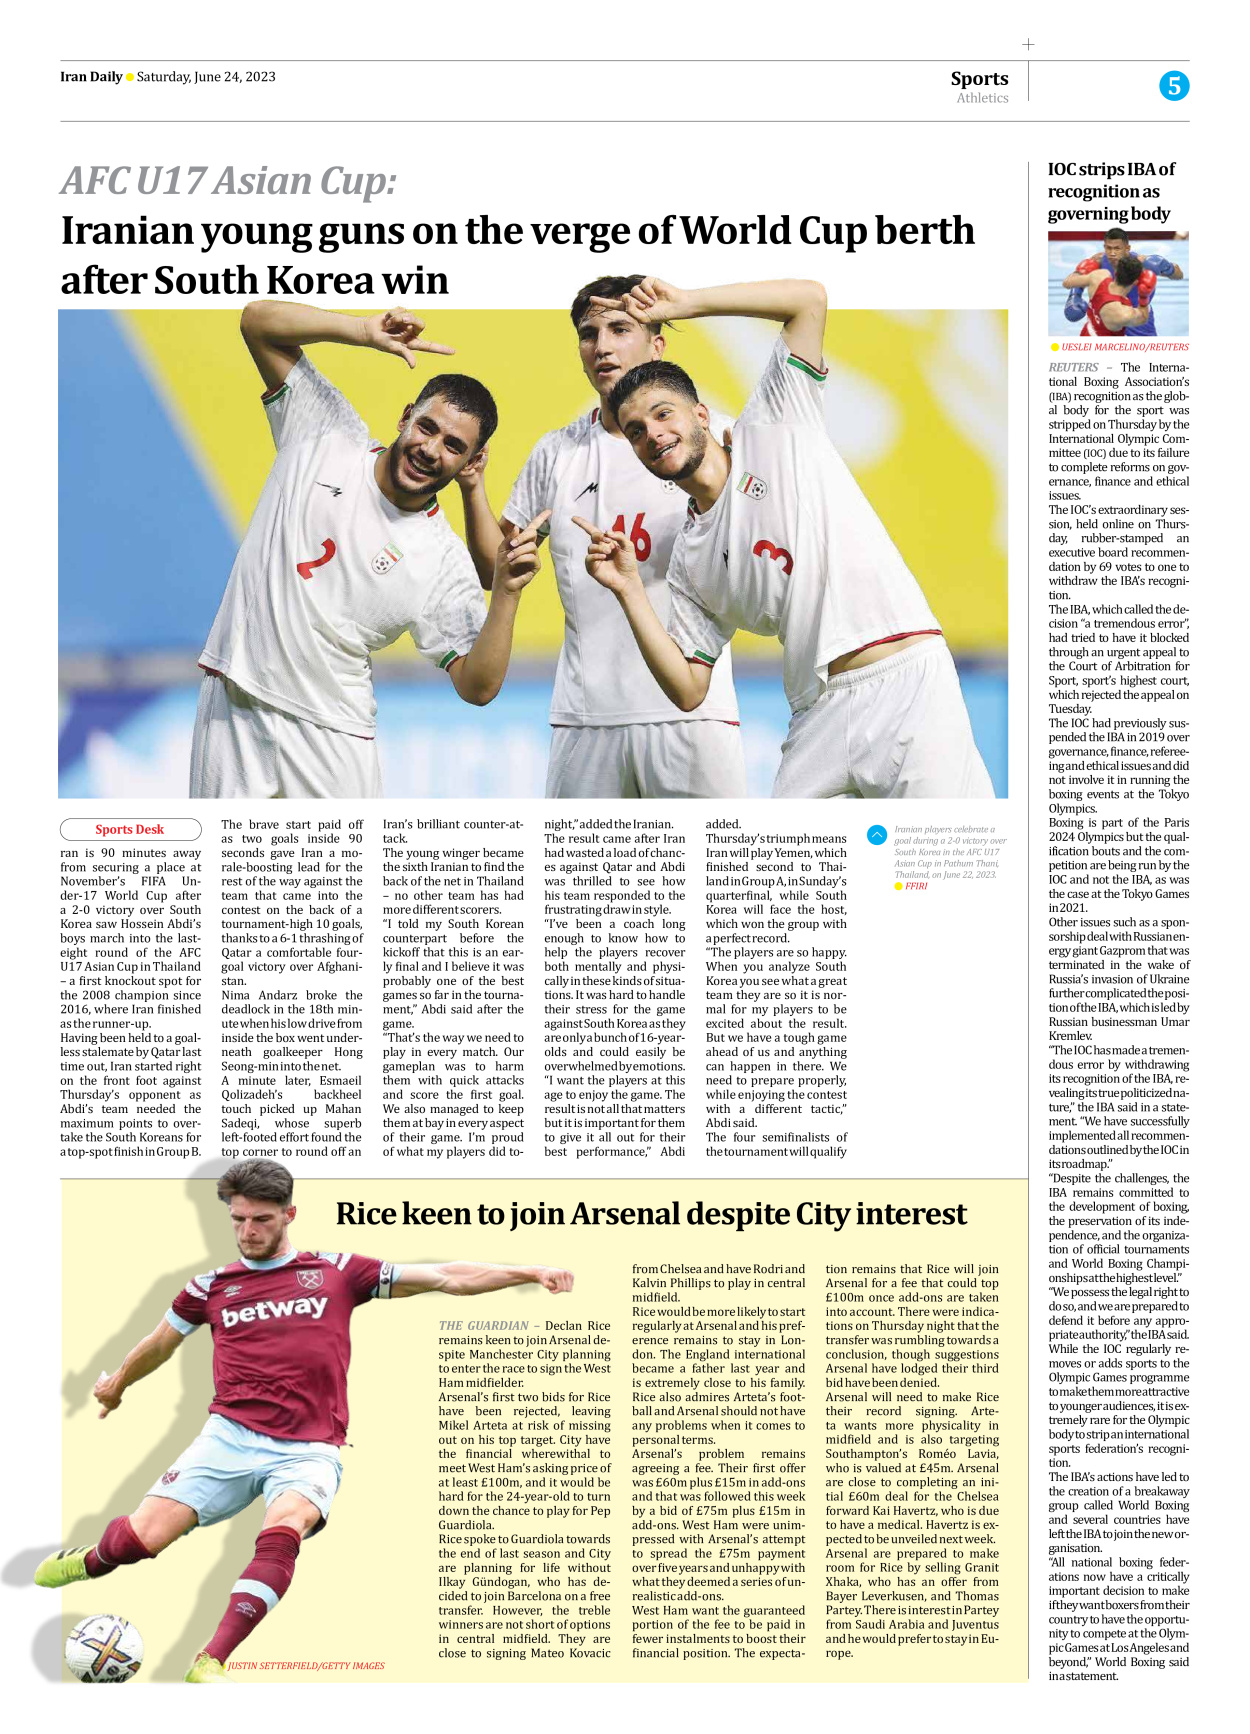 Iran Daily - Number Seven Thousand Three Hundred and Twenty Two - 24 June 2023 - Page 5